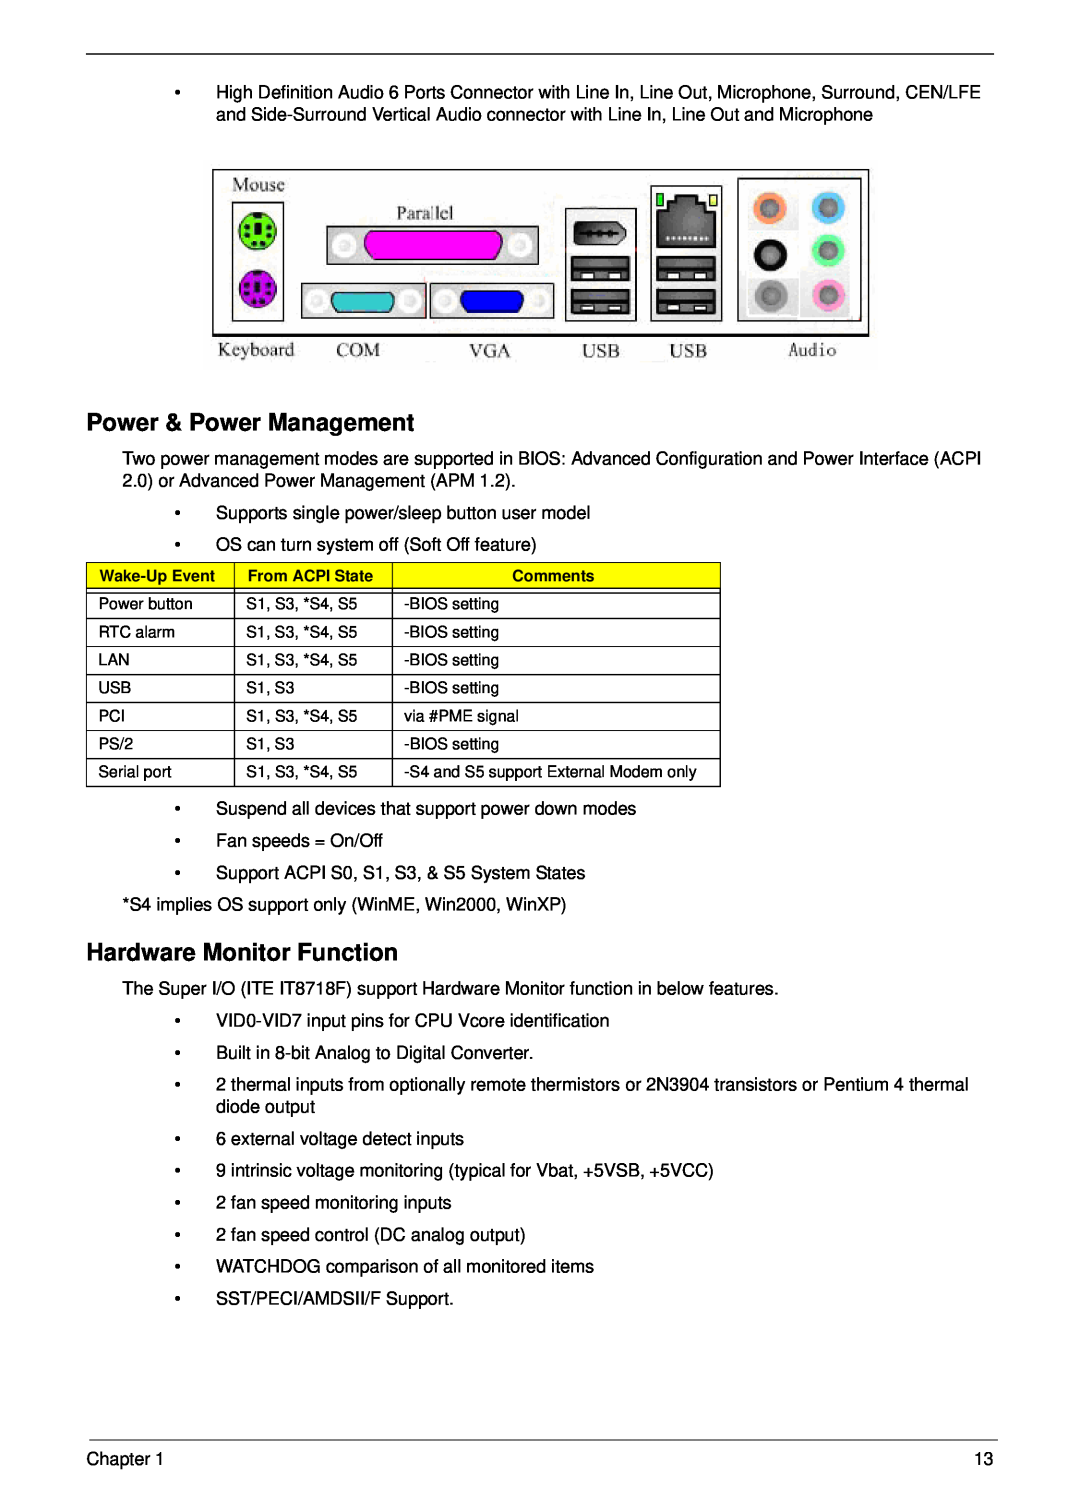 Aspire Digital M261, M1610 Power & Power Management, Hardware Monitor Function, Wake-Up Event, From ACPI State, Comments 